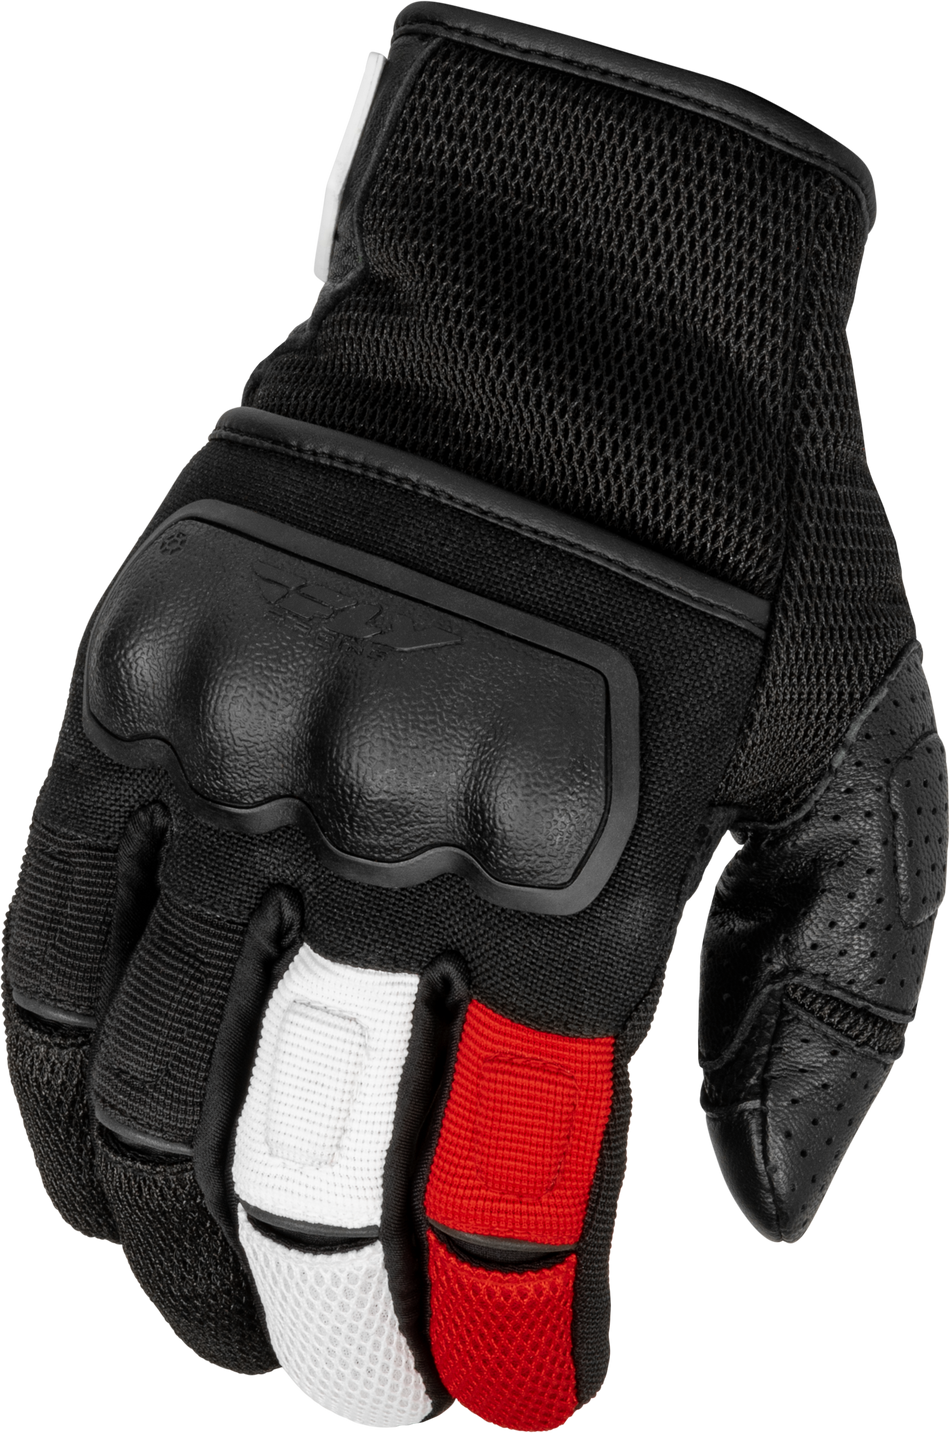 FLY RACING Coolpro Force Gloves Black/White/Red Sm 476-4127S